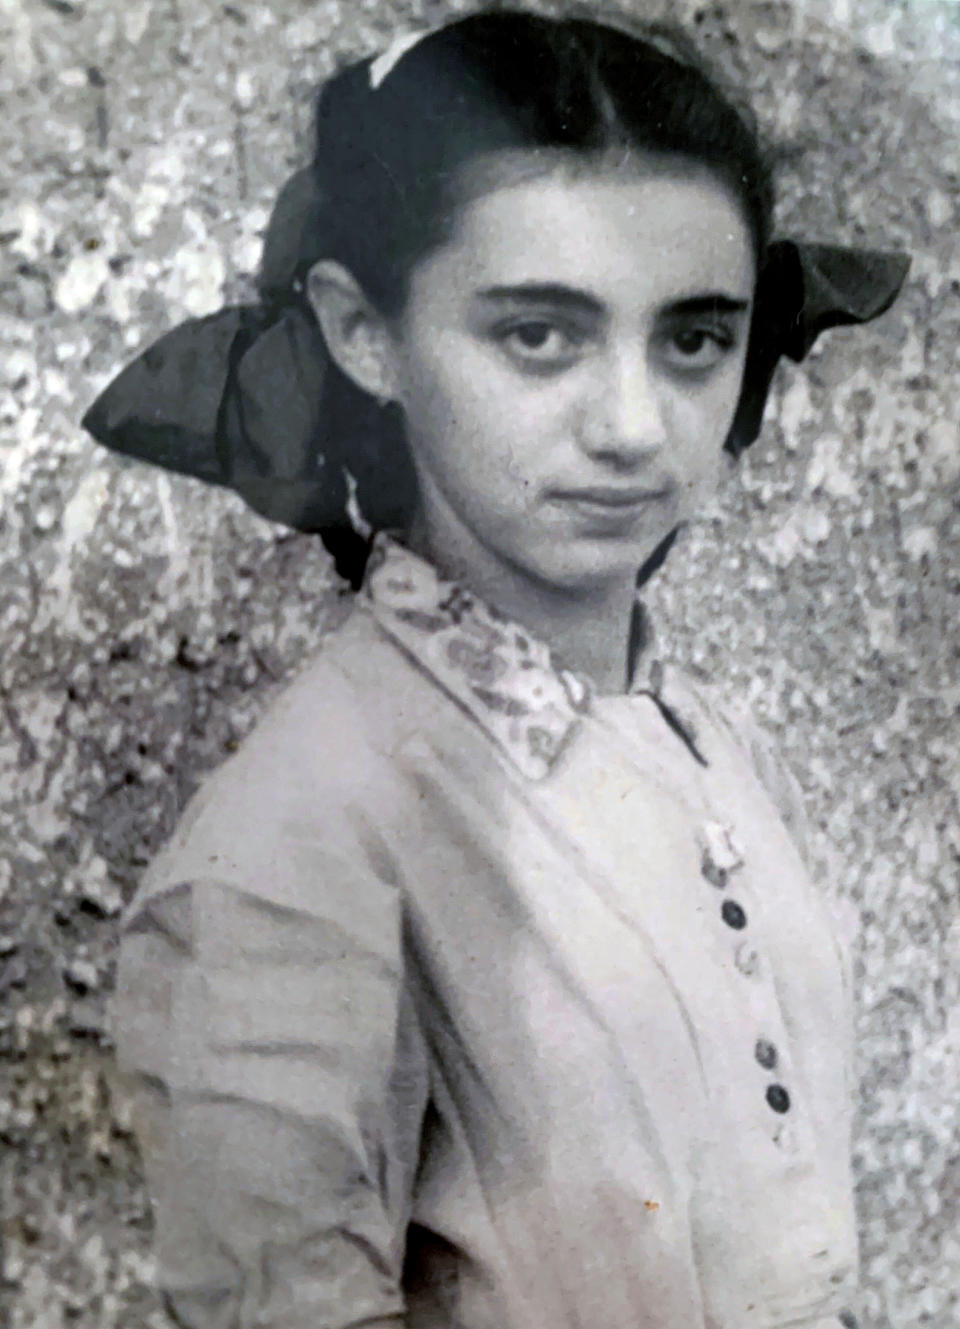 In this 1948 photo, provided by Ruth Brandspiegel, Brandspiegel is photographed in the Hallein Displaced Persons Camp in Austria following World War II. She and her parents resettled in the United States after leaving the camp. Brandspiegel recently became reunited, after more than 70 years, with fellow Holocaust survivor Israel “Sasha” Eisenberg, whom she met at the displaced camp in Austria where they became friends. (Courtesy of Ruth Brandspiegel via AP)